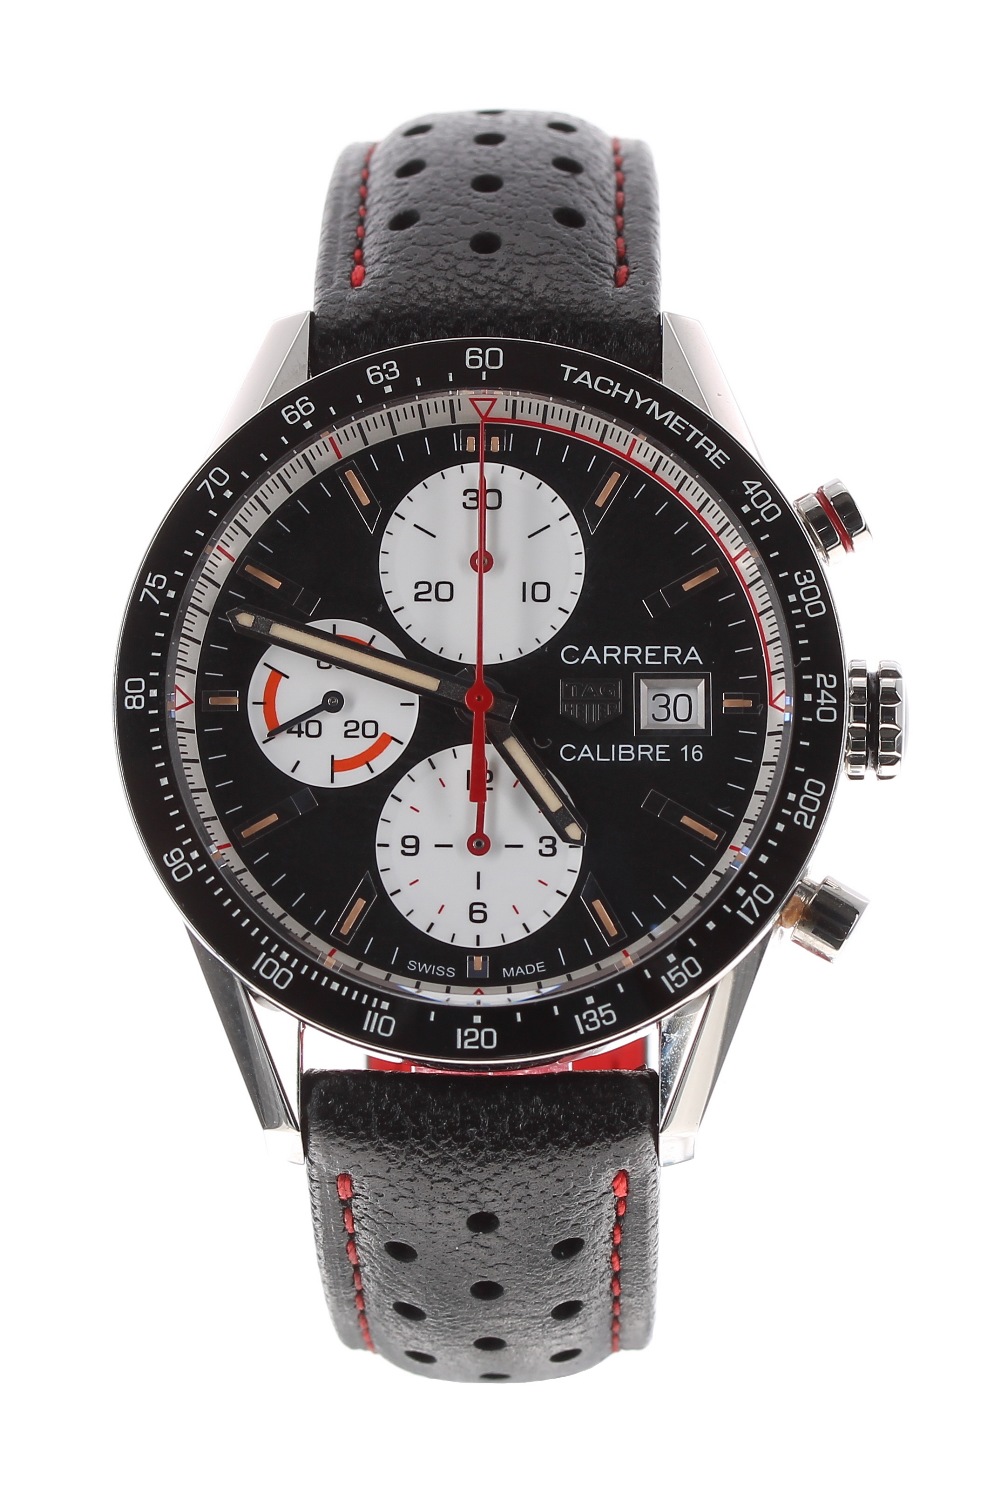 Tag Heuer Carrera Calibre 16 chronograph automatic stainless steel gentleman's wristwatch, ref. - Image 2 of 2